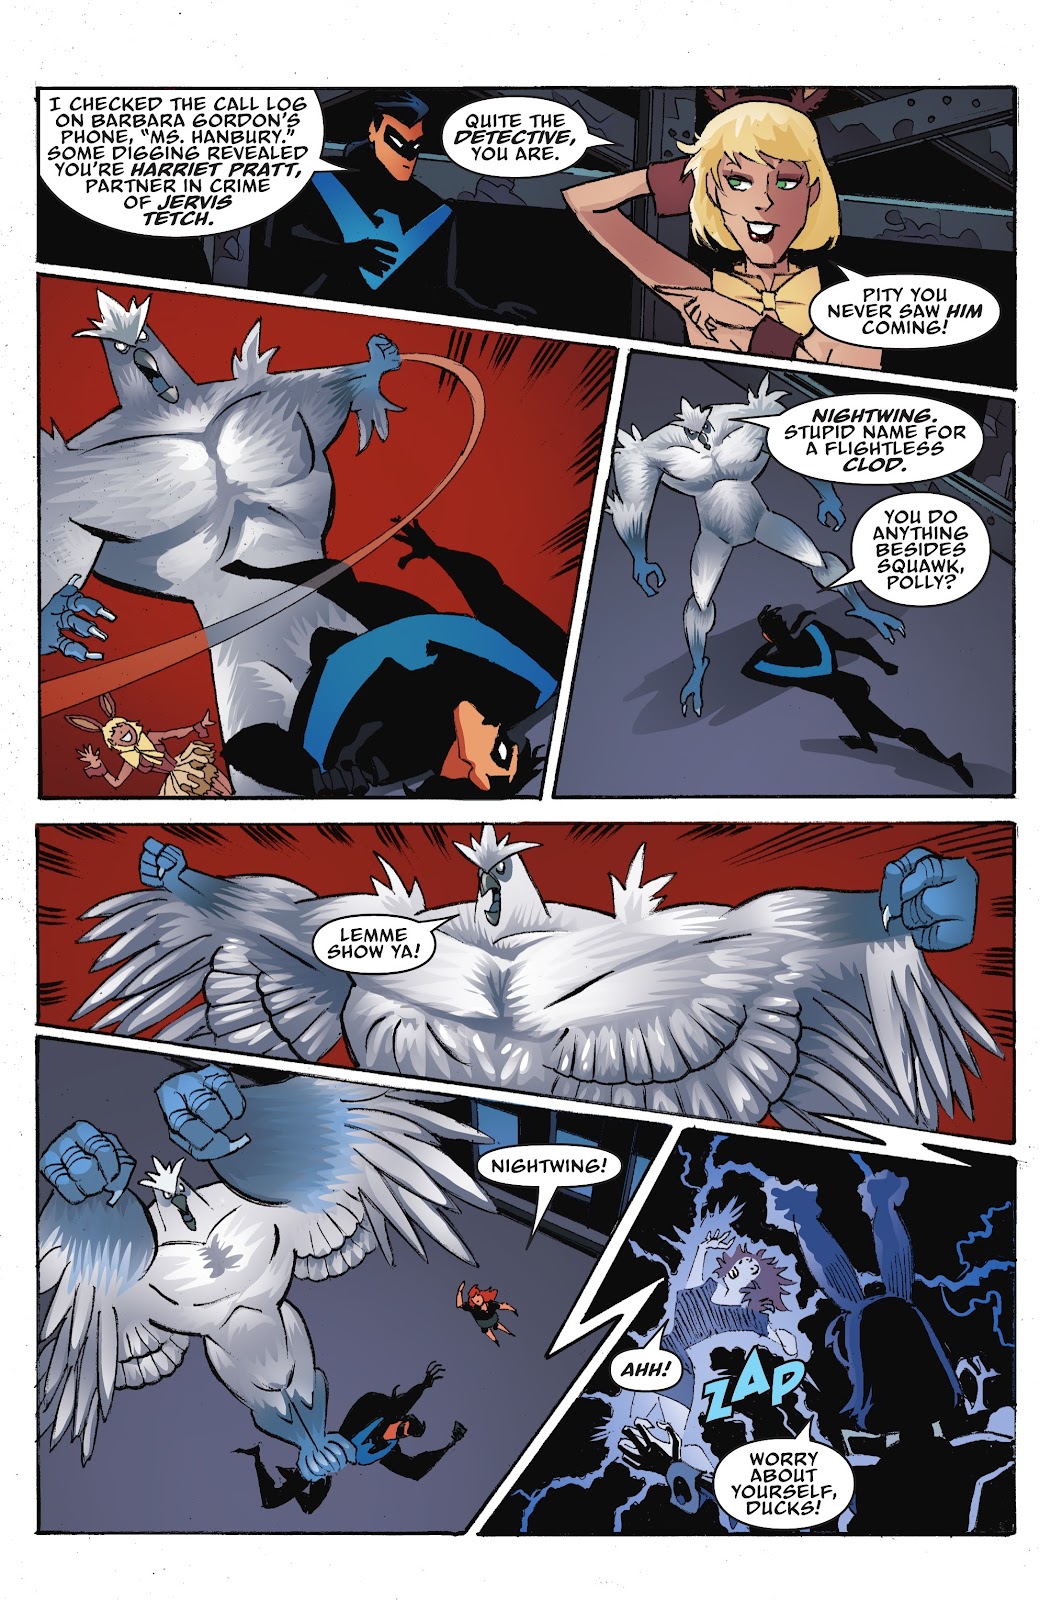 Batman: The Adventures Continue: Season Two issue 7 - Page 16